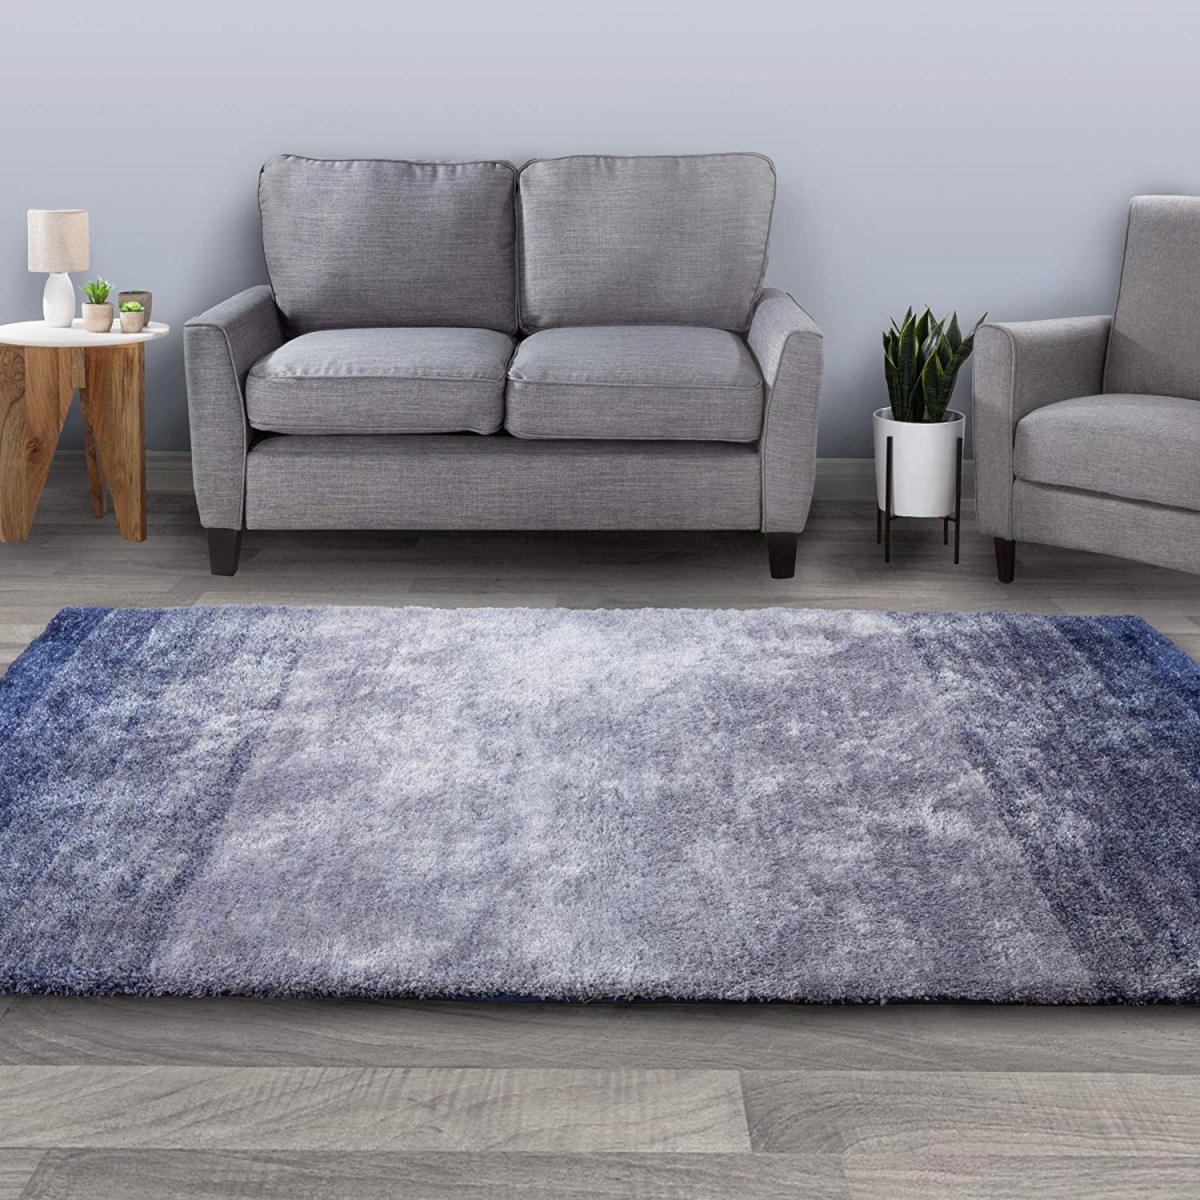 62a-64357 5 Ft. 3 In. X 7 Ft. 7 In. Shag Area Rug Plush Ombre Throw Carpet, Blue